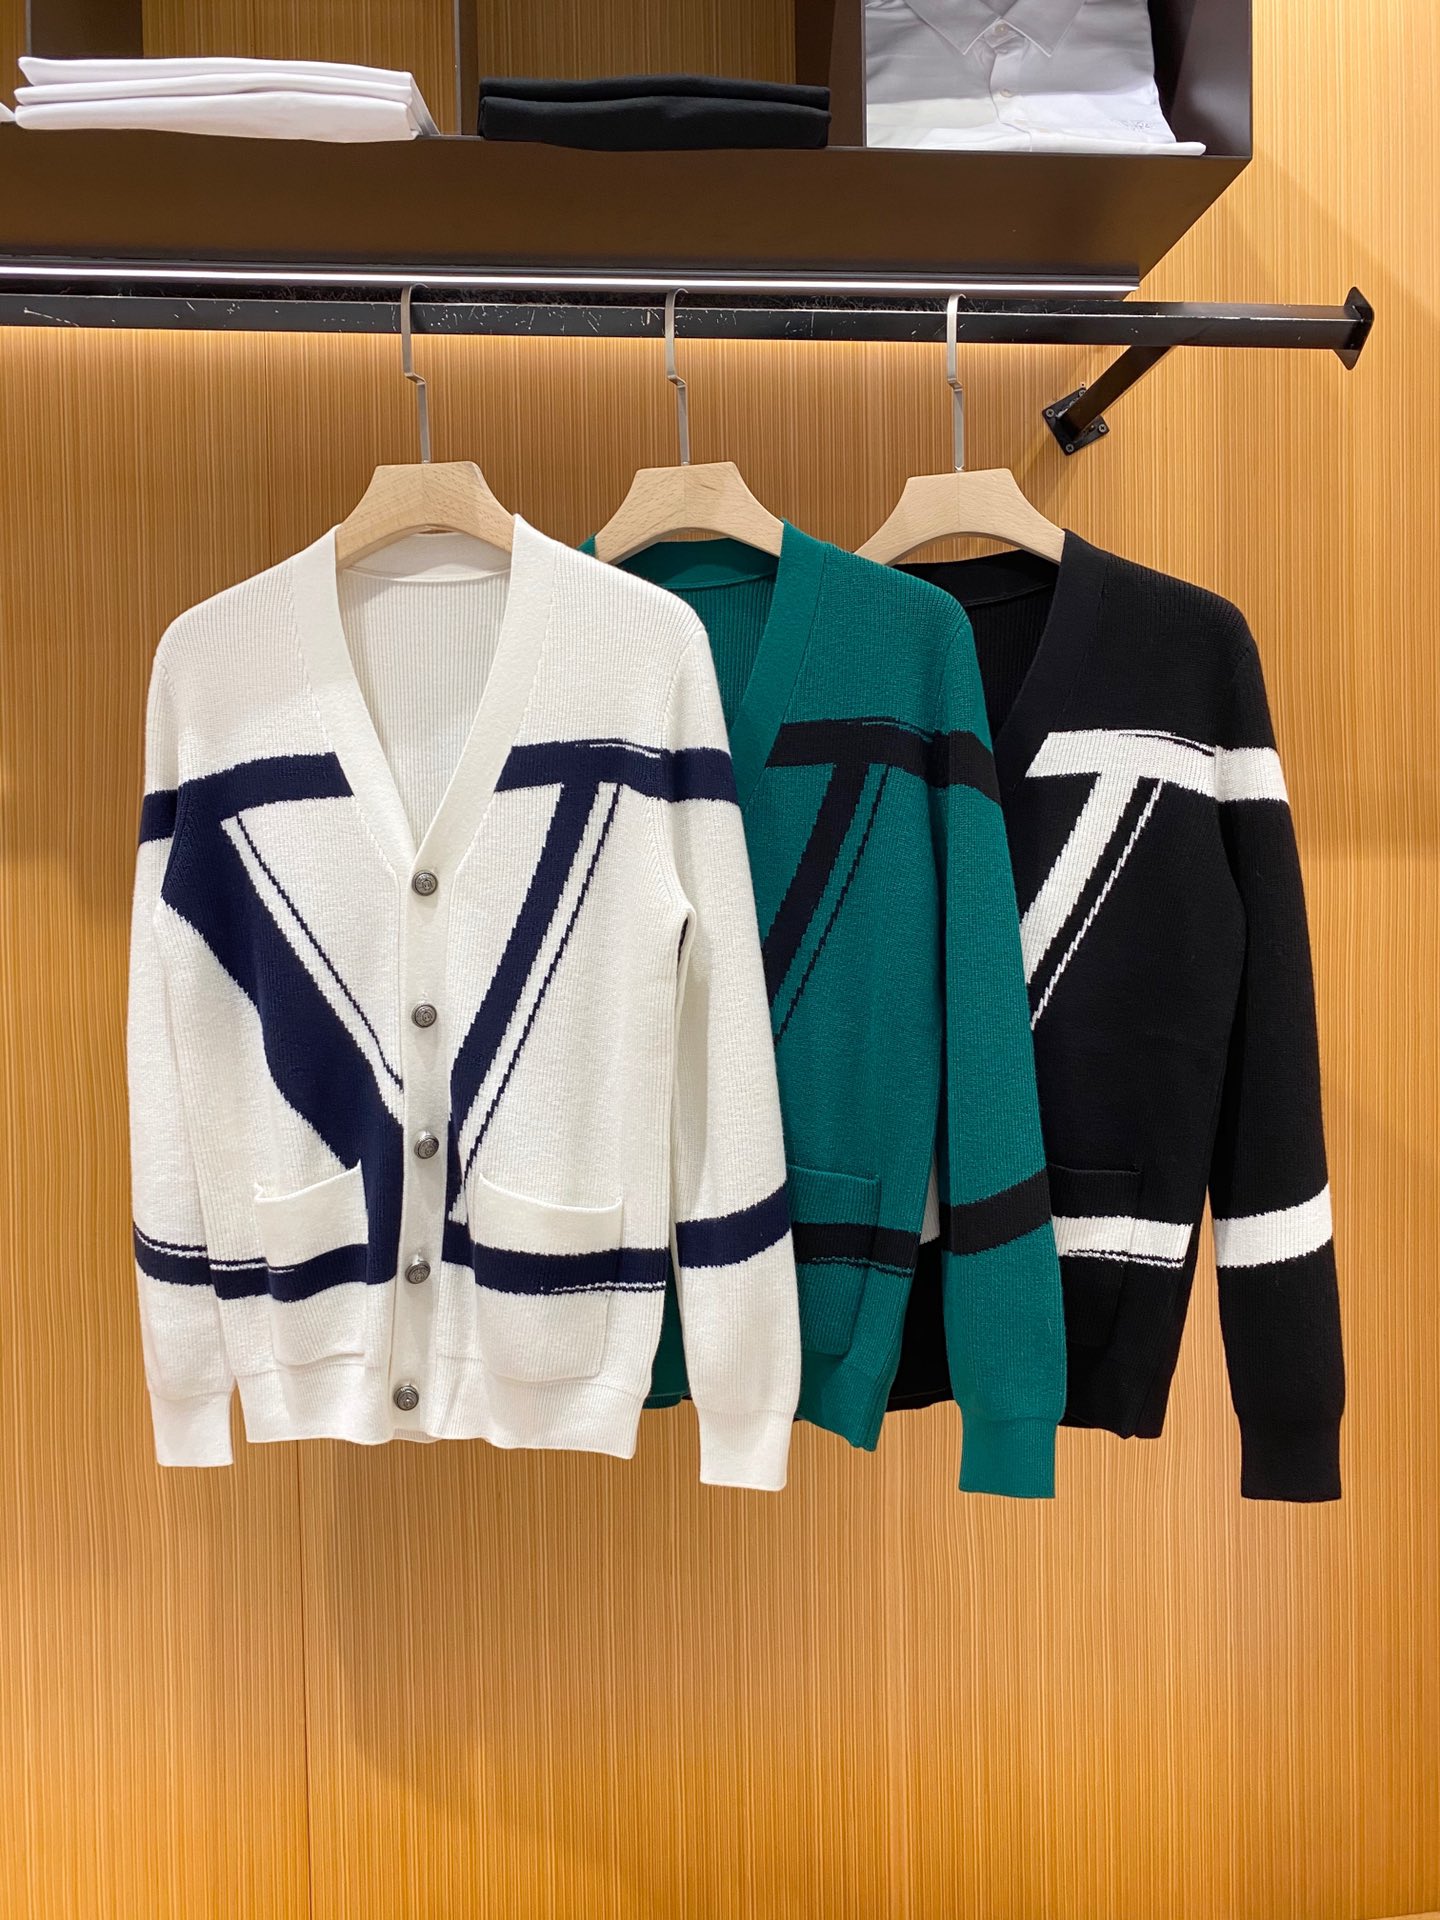 Louis Vuitton Clothing Cardigans Knit Sweater Black Green White Men Knitting Wool Fall/Winter Collection Casual